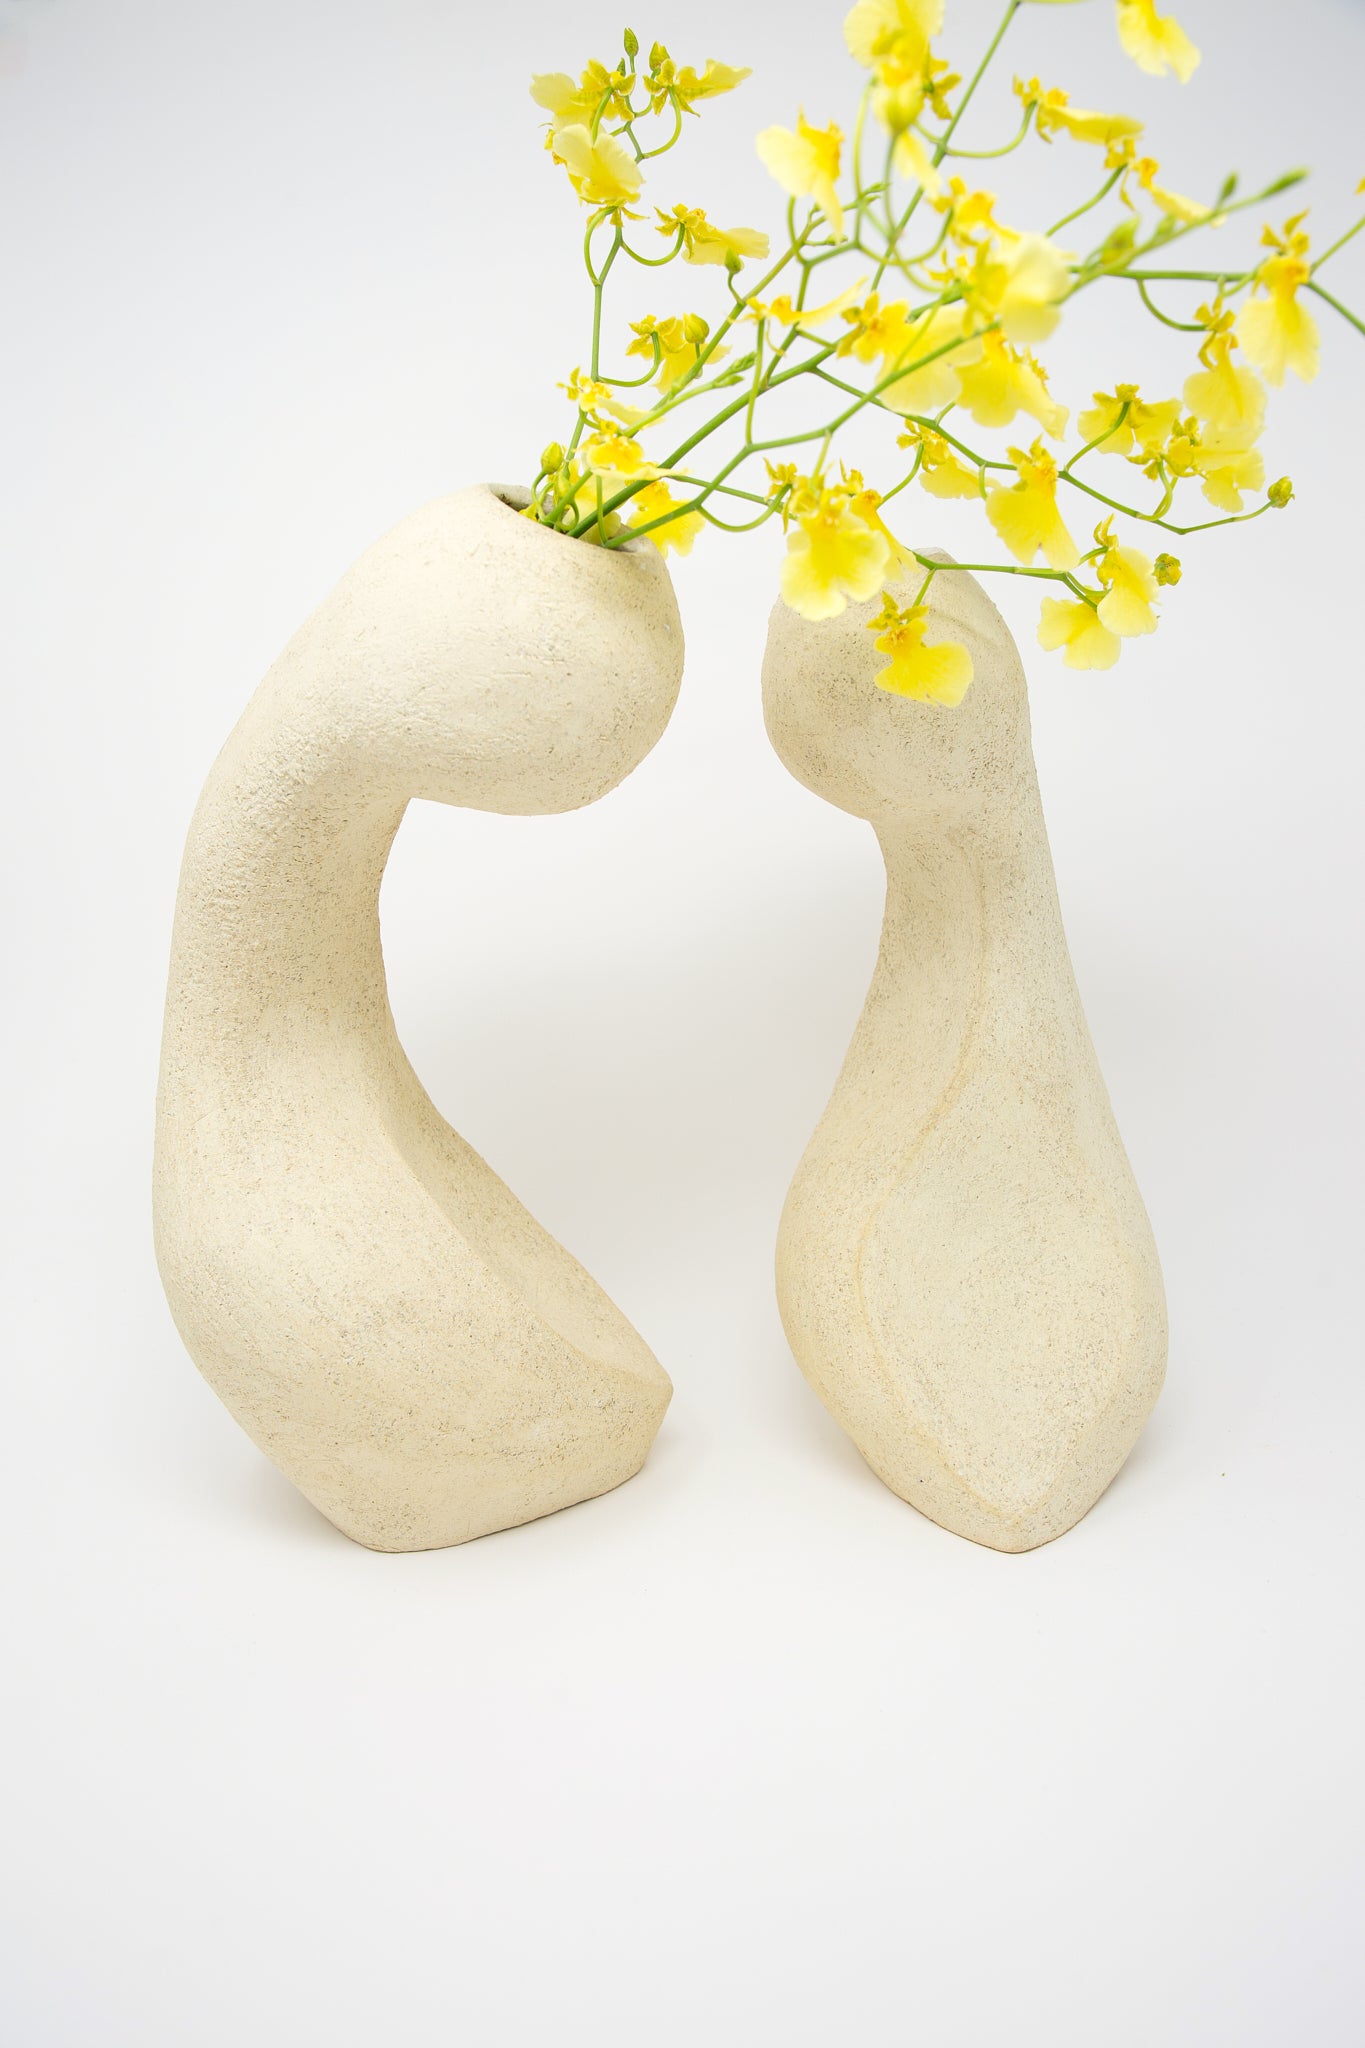 Abstract ceramic vessels with yellow flowers on a white background include the Large Hand Built Vessel No. 000711 Bud Vase by Lost Quarry.